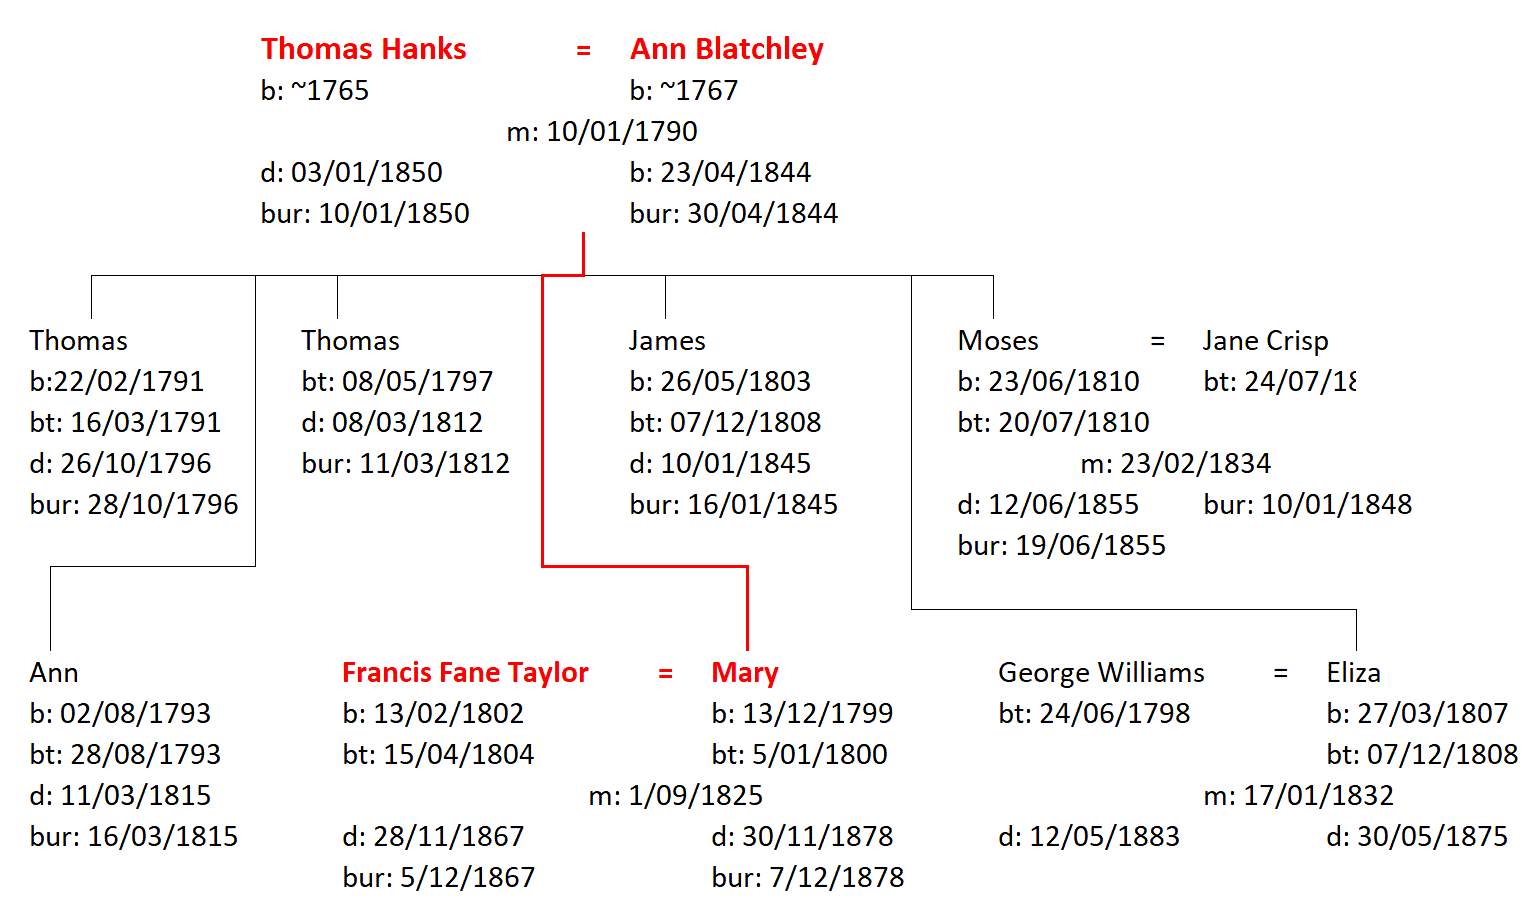 Figure 3: The Family of Thomas and Ann Hanks